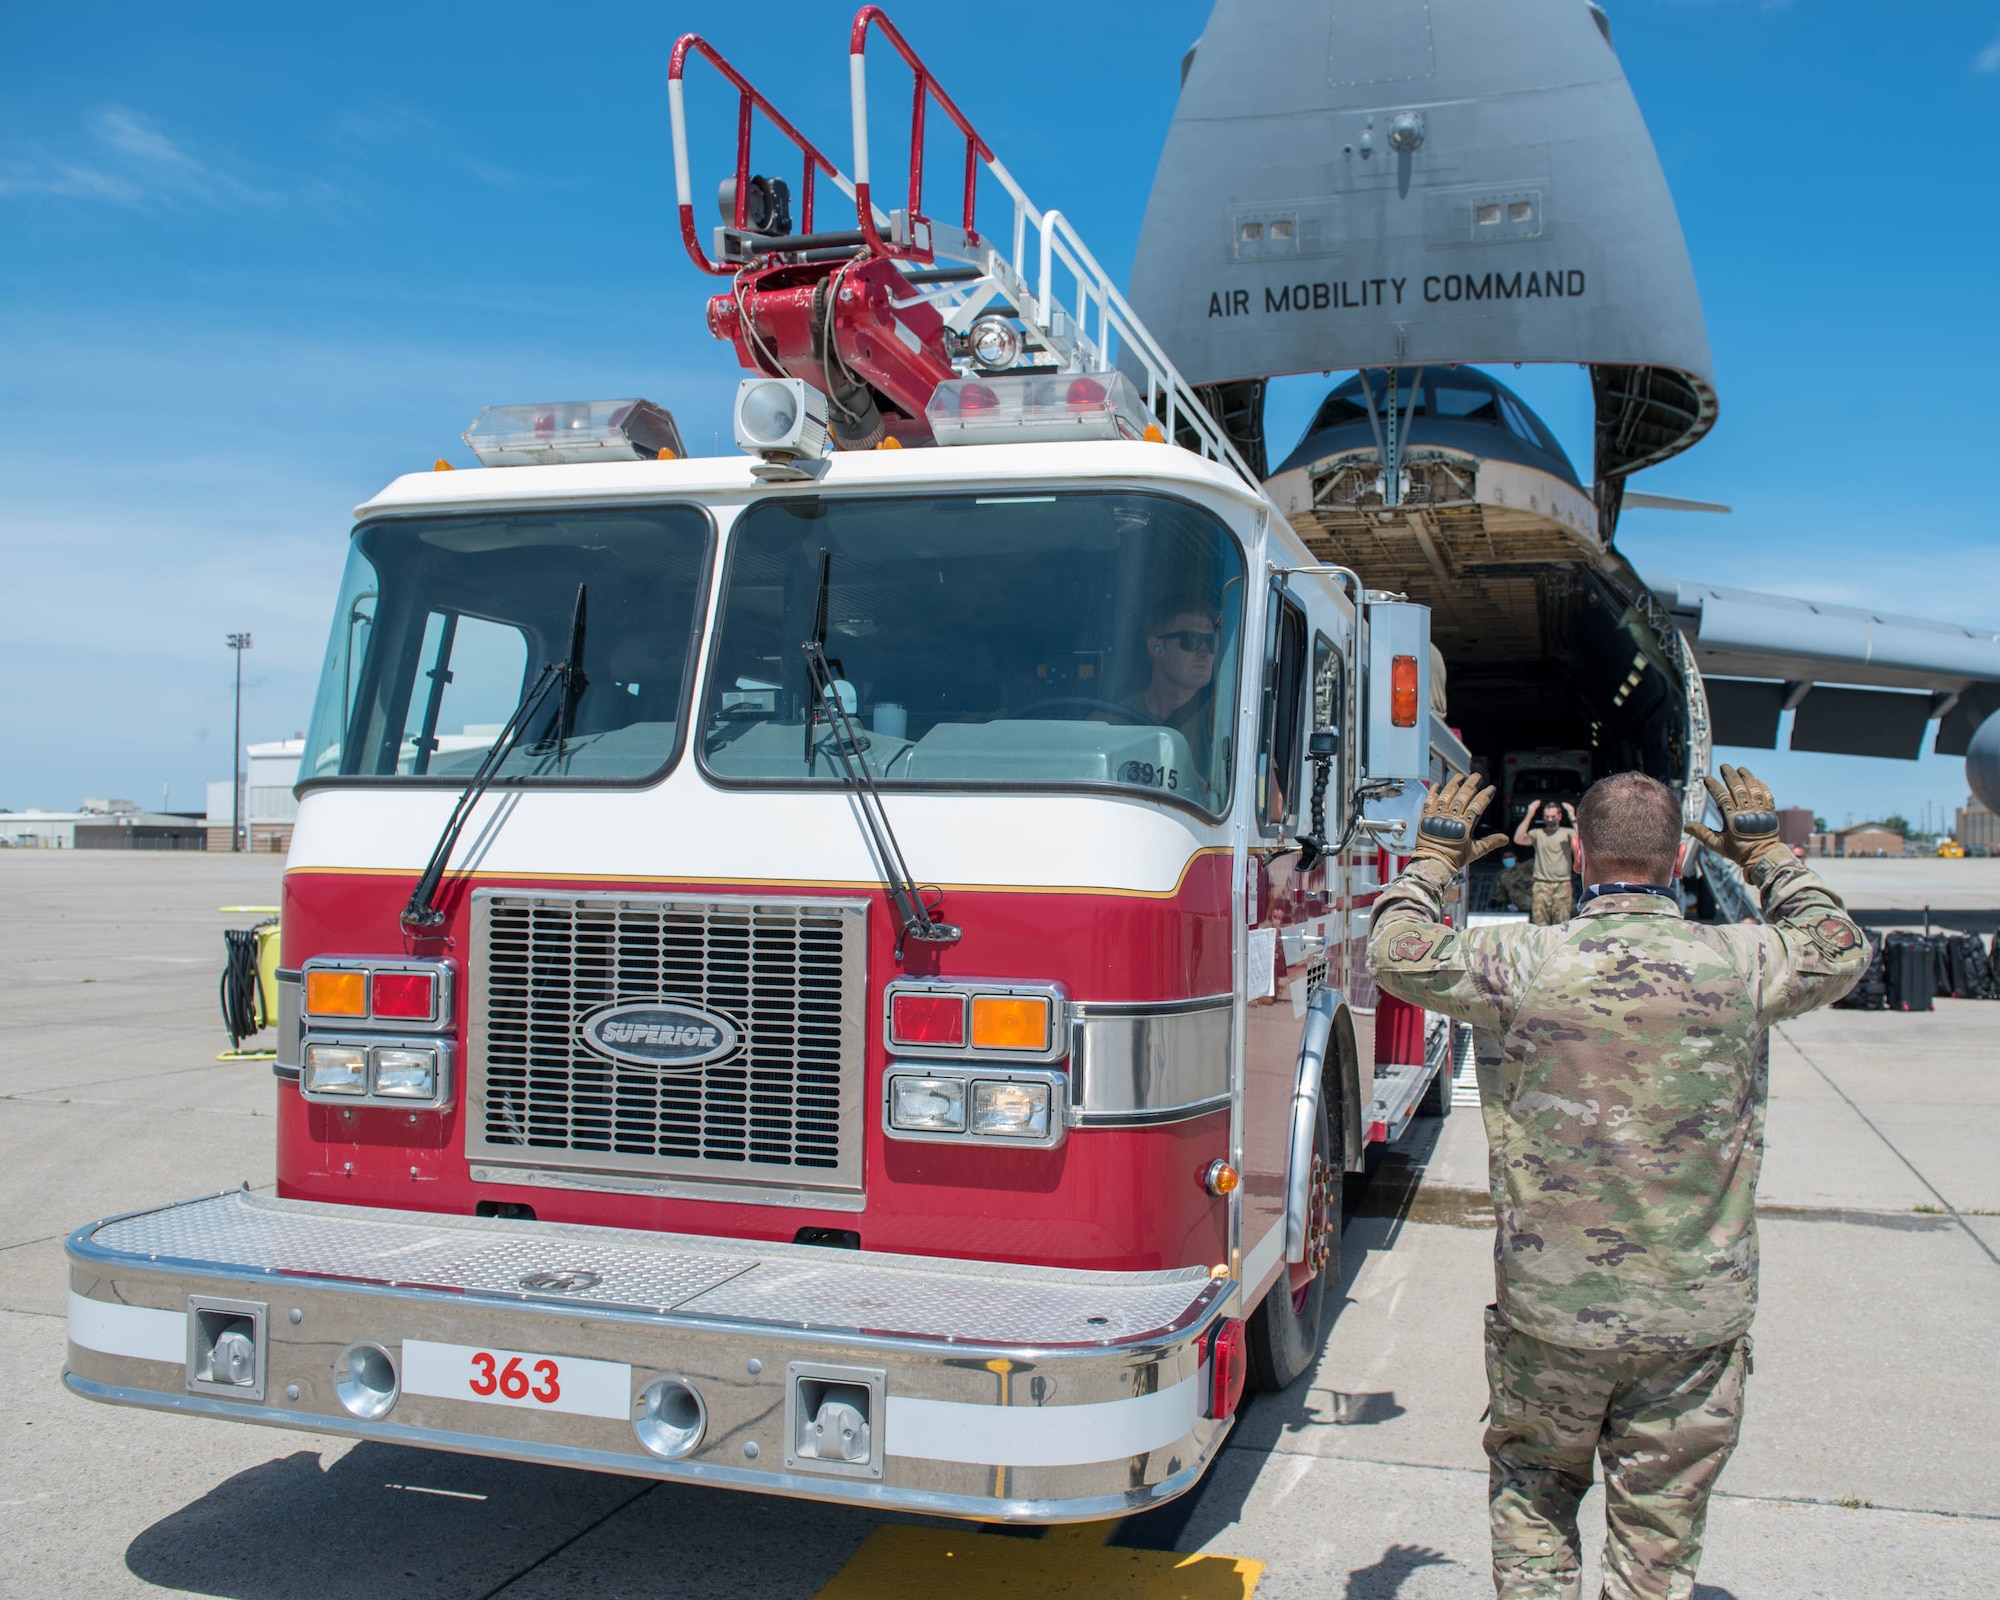 Members of the 30th Aerial Port Squadron, Niagara Falls Air Reserve Station N.Y. and 22nd Airlift Squadron, Travis, Air Force Base, Calif. prepare to load a fire truck inside a C-5 Galaxy aircraft at Niagara Falls ARS on July 25, 2020.  The donated fire truck from Canada and two ambulances will end their long journey in Nicaragua. (U.S. Air Force photo by Peter Borys)